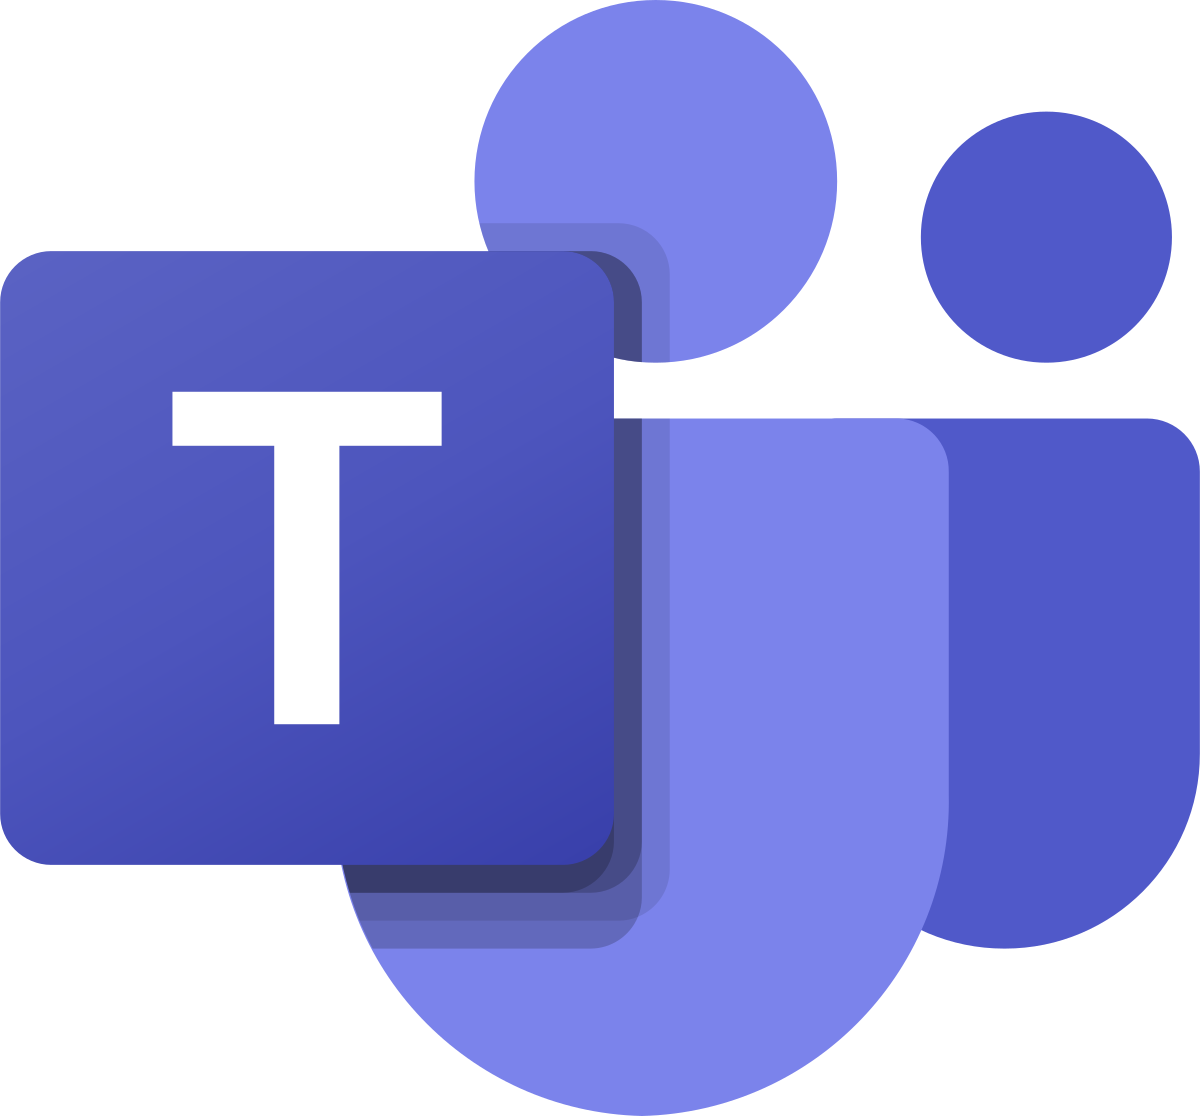 Do Space Instructorled training for Microsoft Teams Do Space